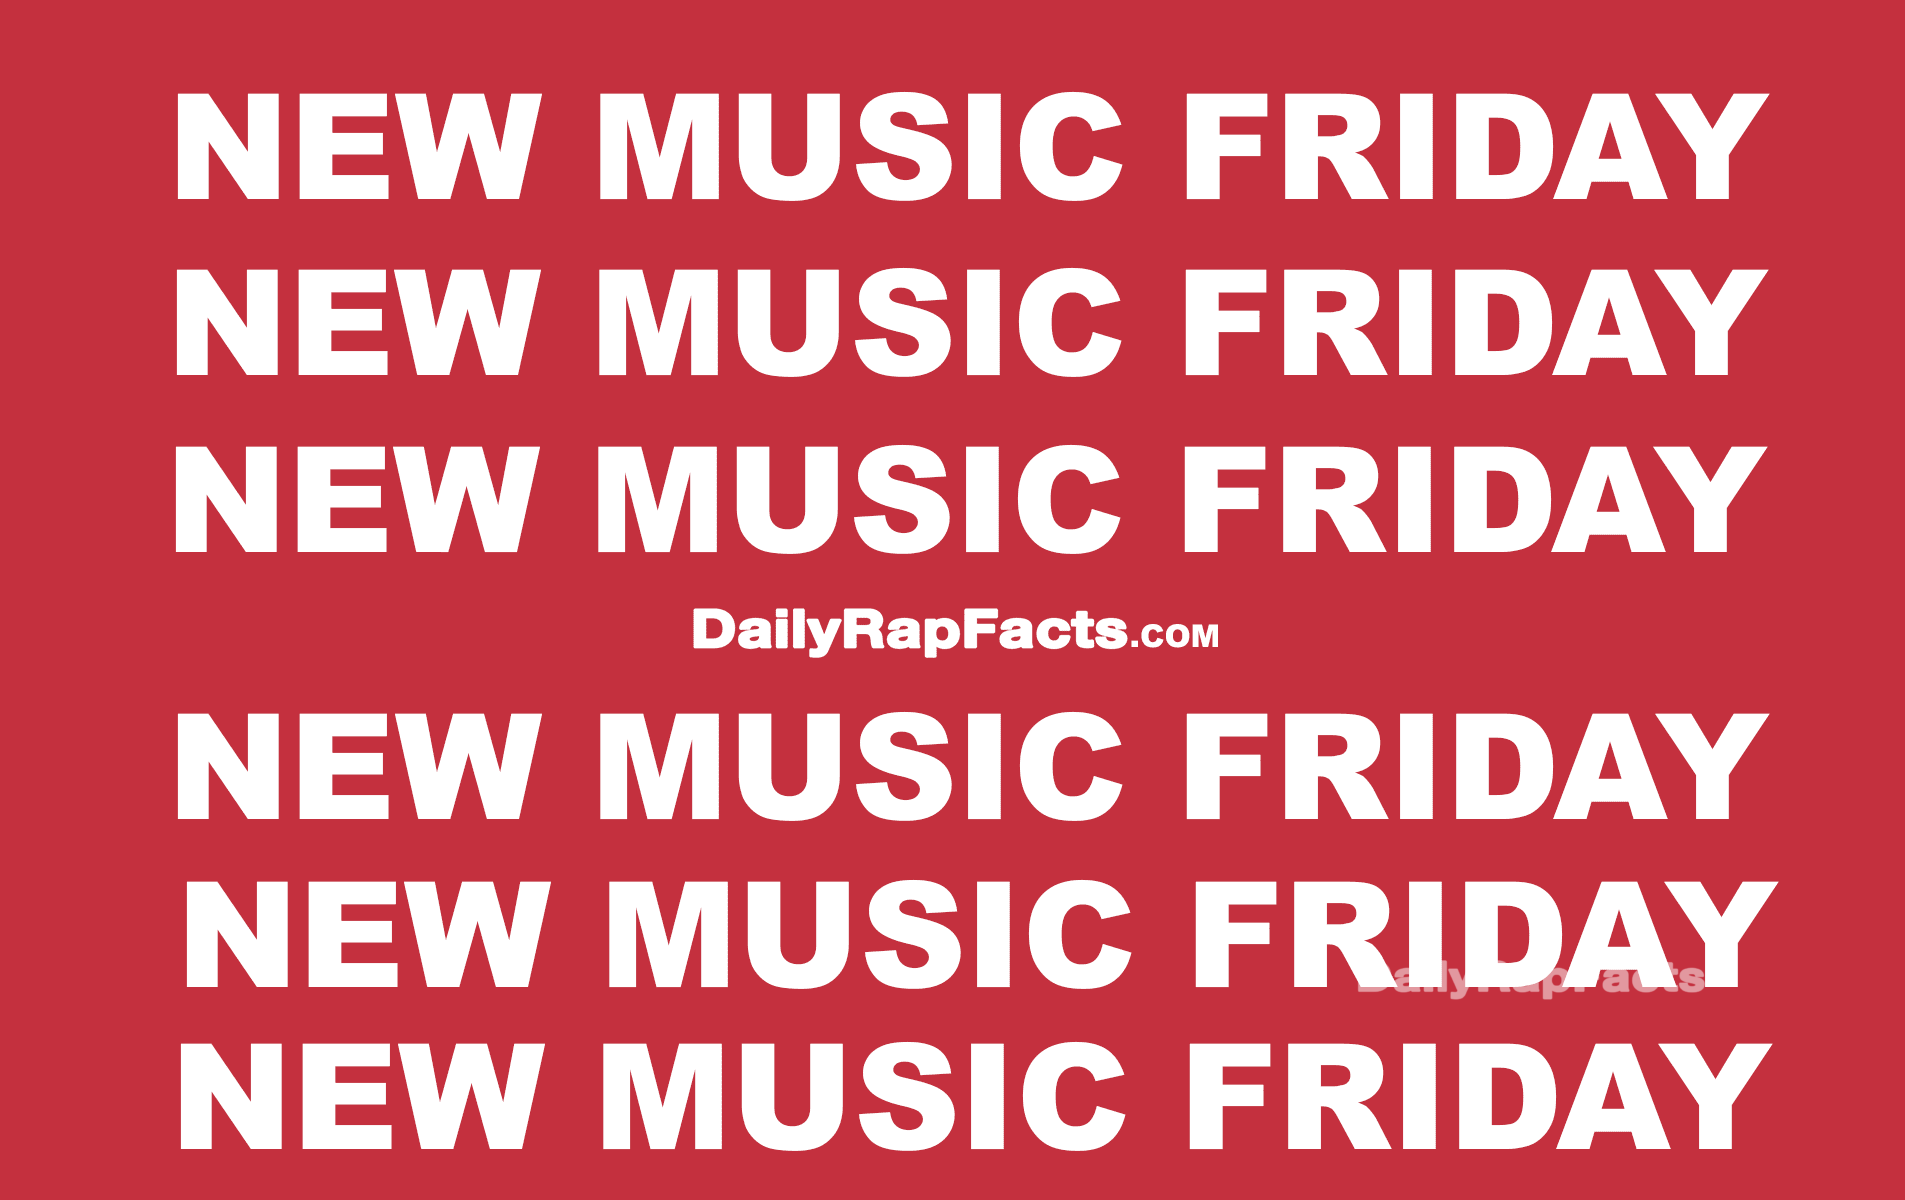 Why does New Music release on Fridays?